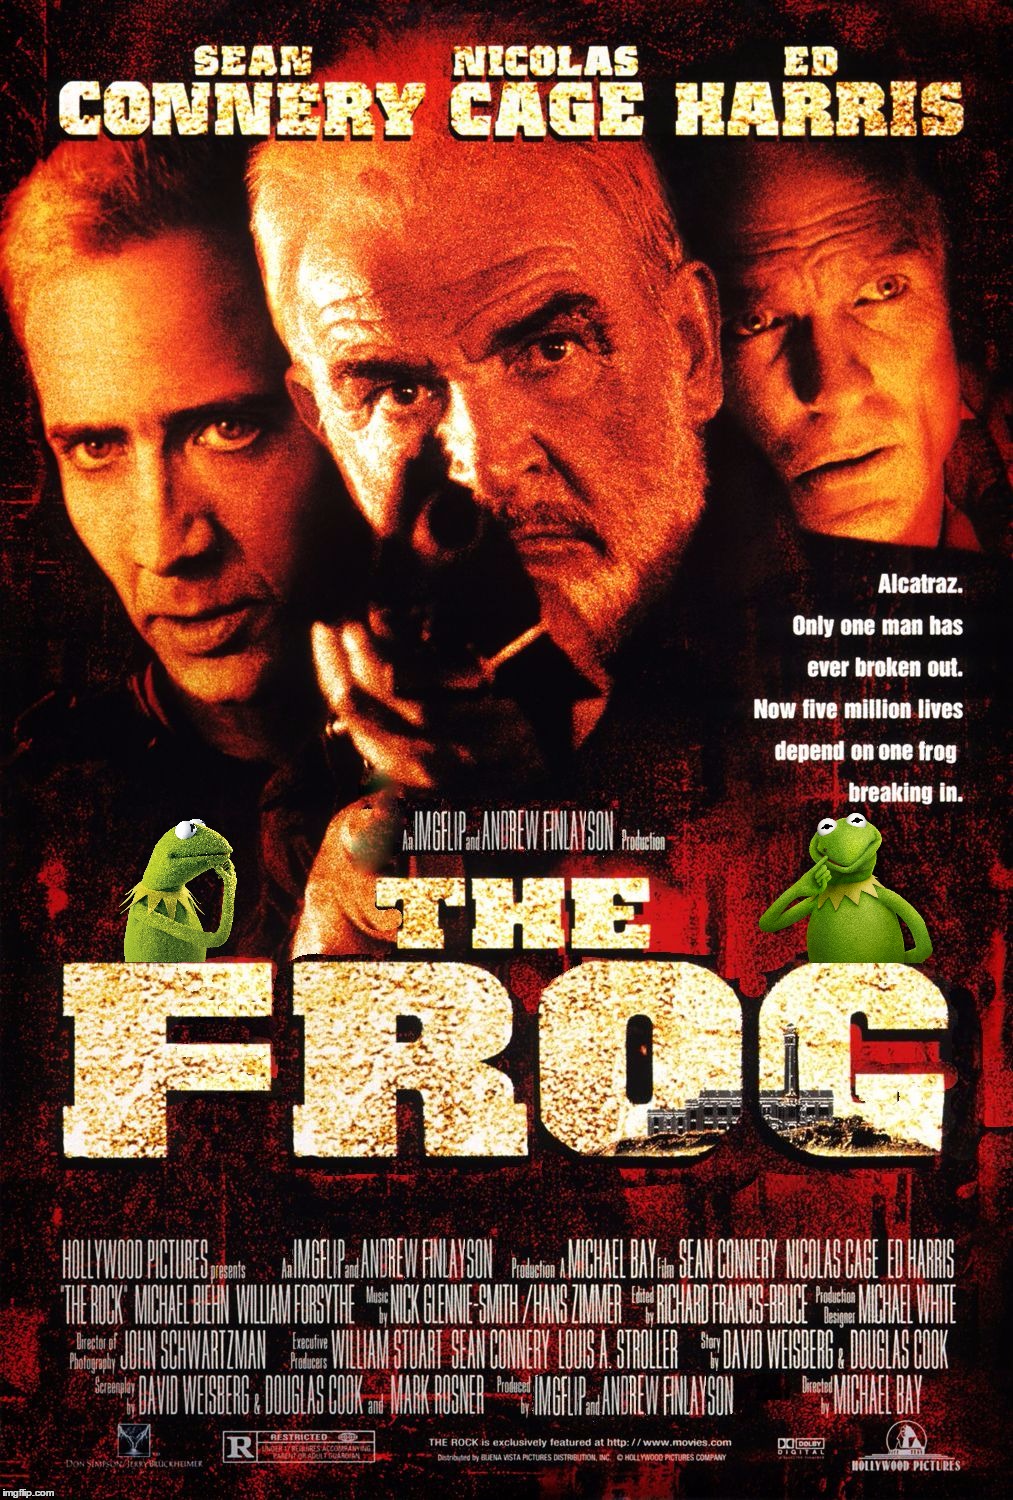 Been a while since I made a movie poster.  One frog is breaking in and one is breaking out! | image tagged in the frog,the rock alcatraz,kermit vs connery,nicholas cage,ed harris,movie poster | made w/ Imgflip meme maker